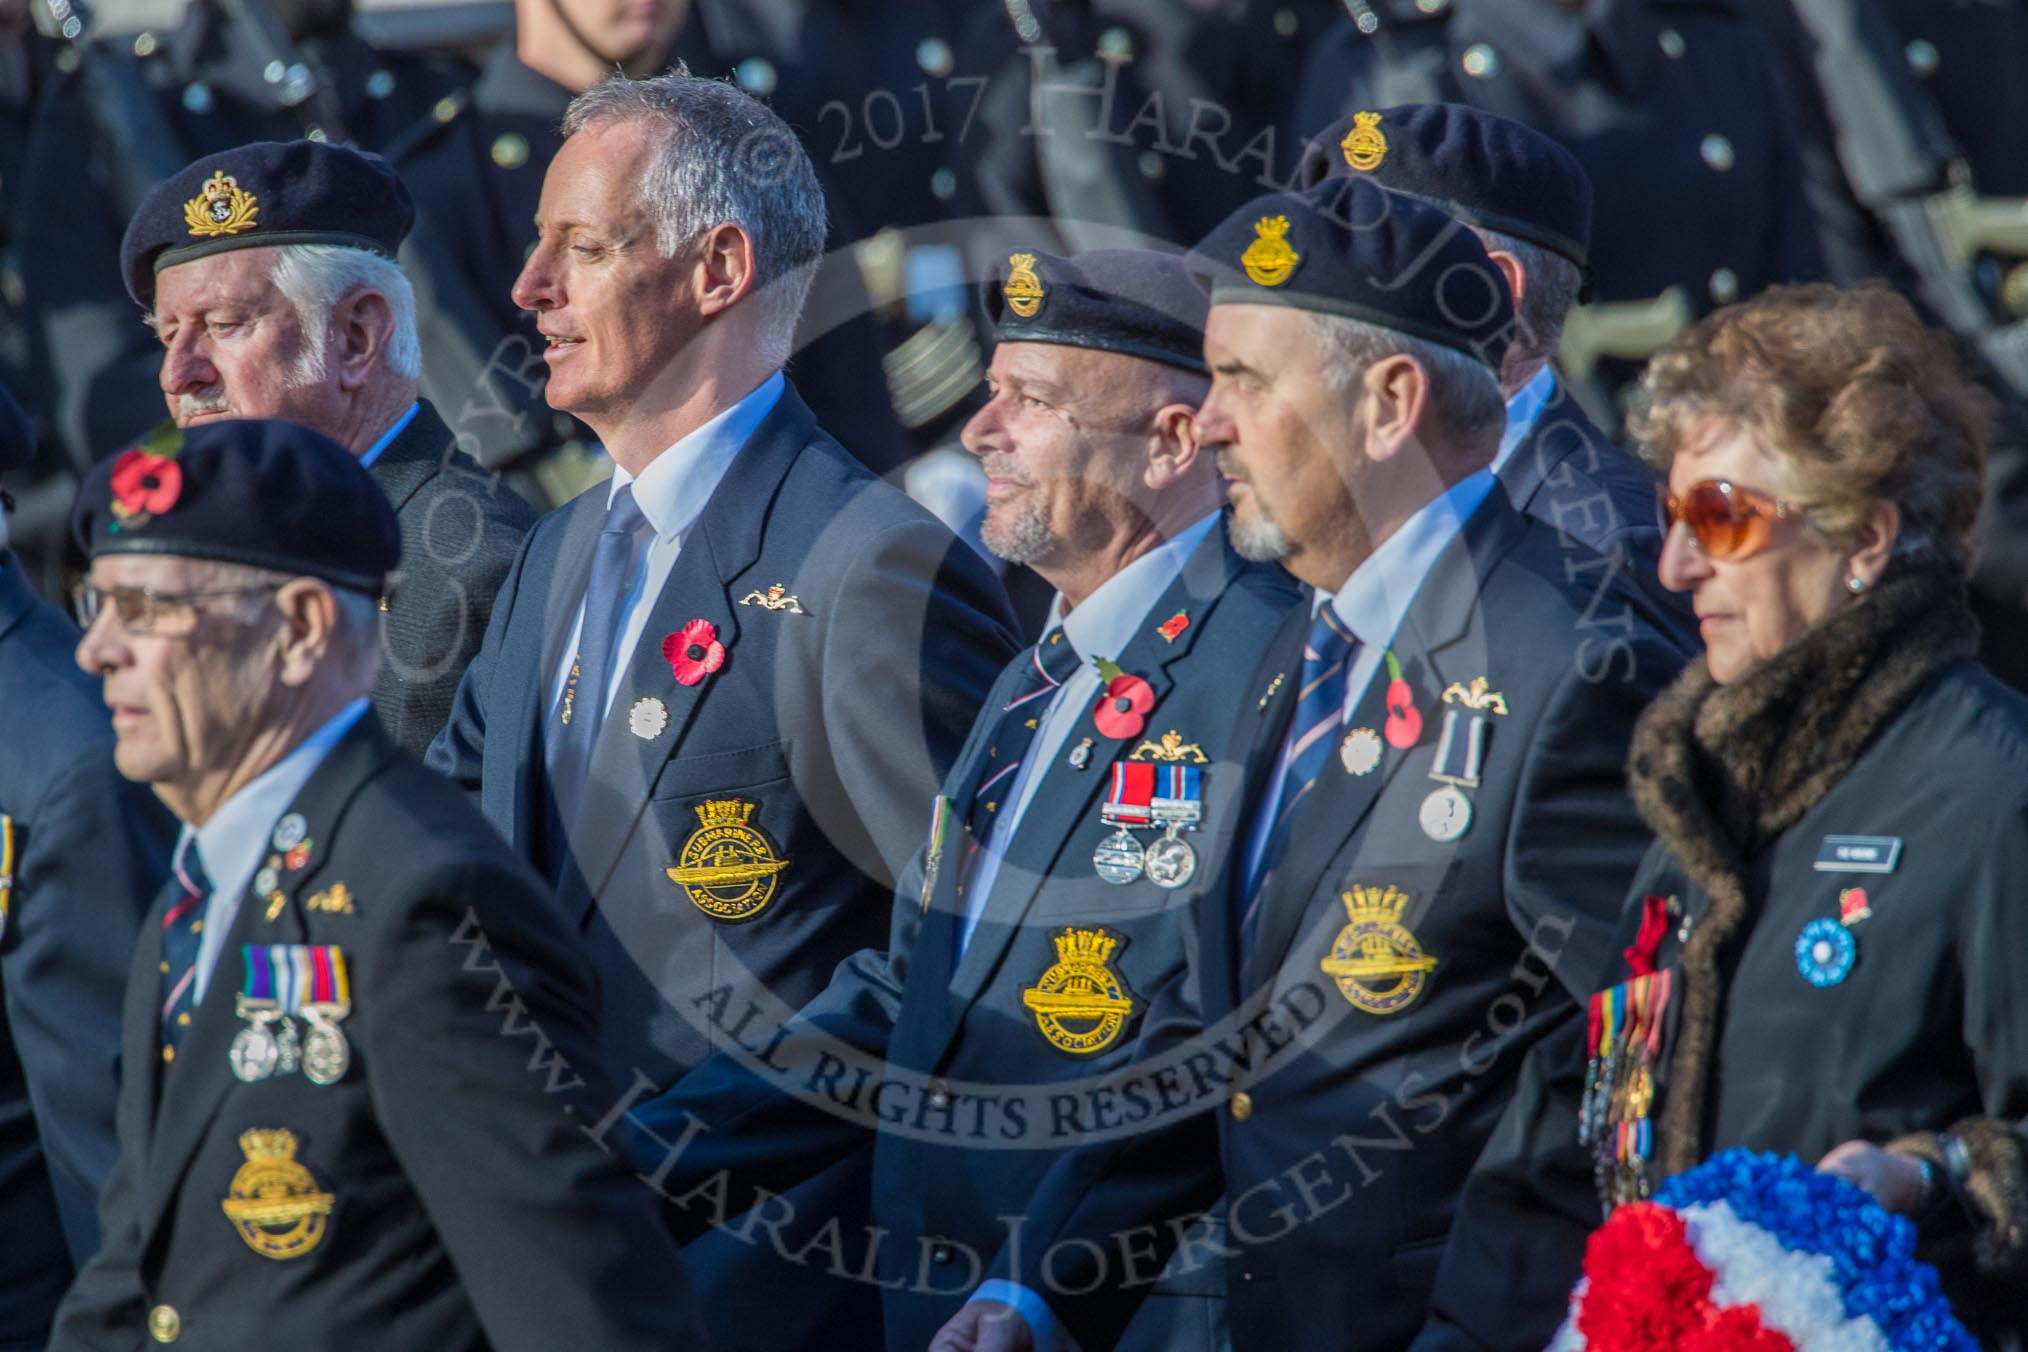 Submariners Association (Group E38, 28 members) during the Royal British Legion March Past on Remembrance Sunday at the Cenotaph, Whitehall, Westminster, London, 11 November 2018, 11:46.